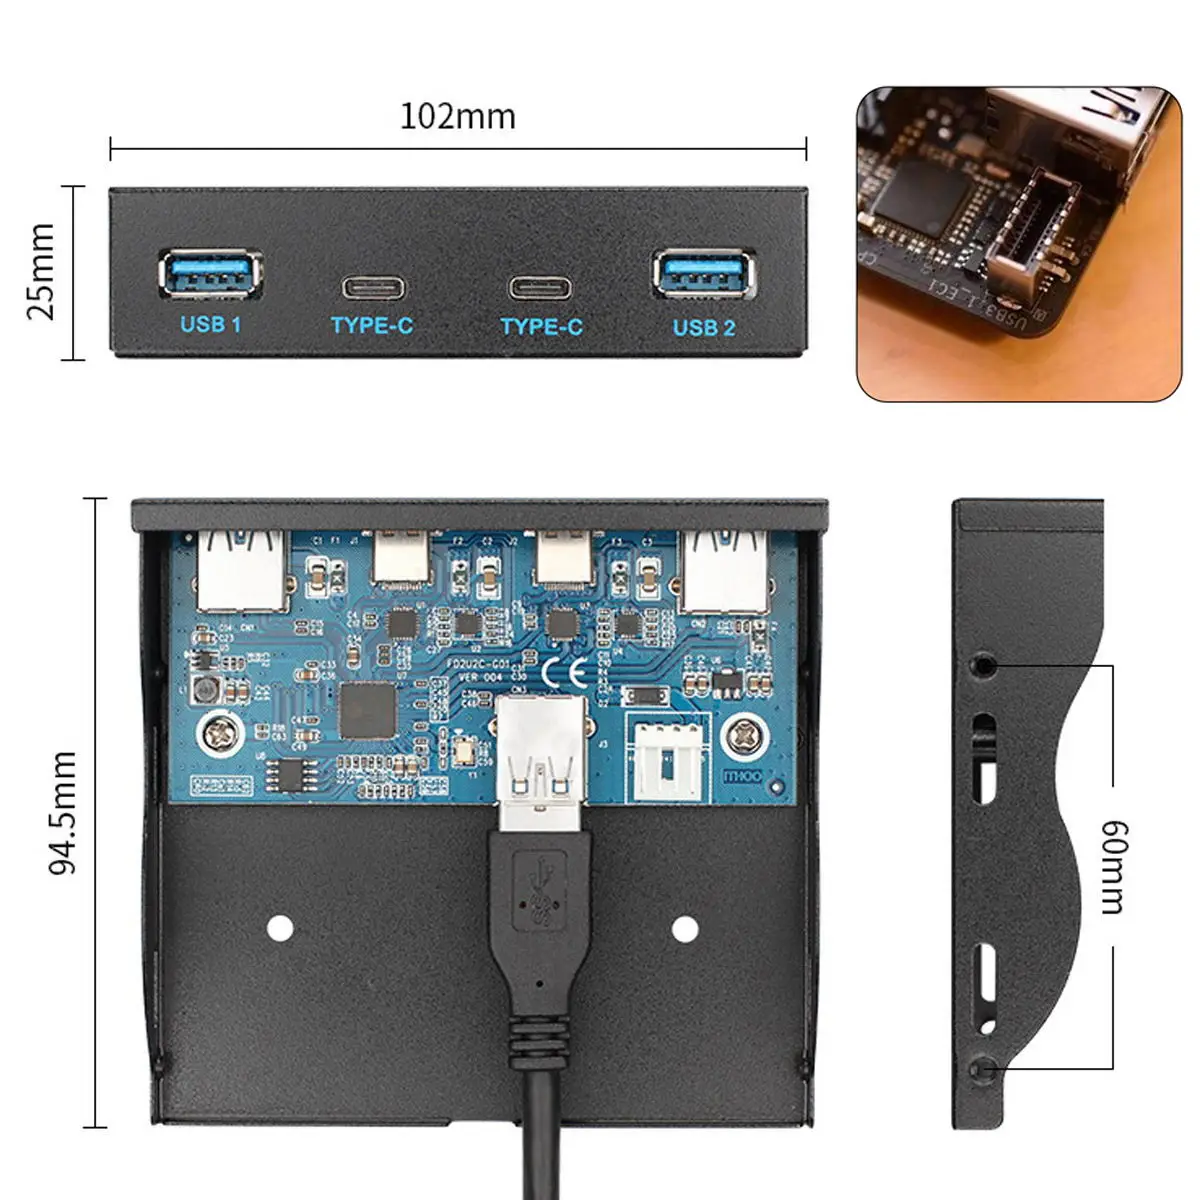 

CY USB 3.1 Front Panel Header to USB-C & USB 3.0 HUB 4 Ports Front Panel Motherboard Cable for 3.5" Floppy Bay